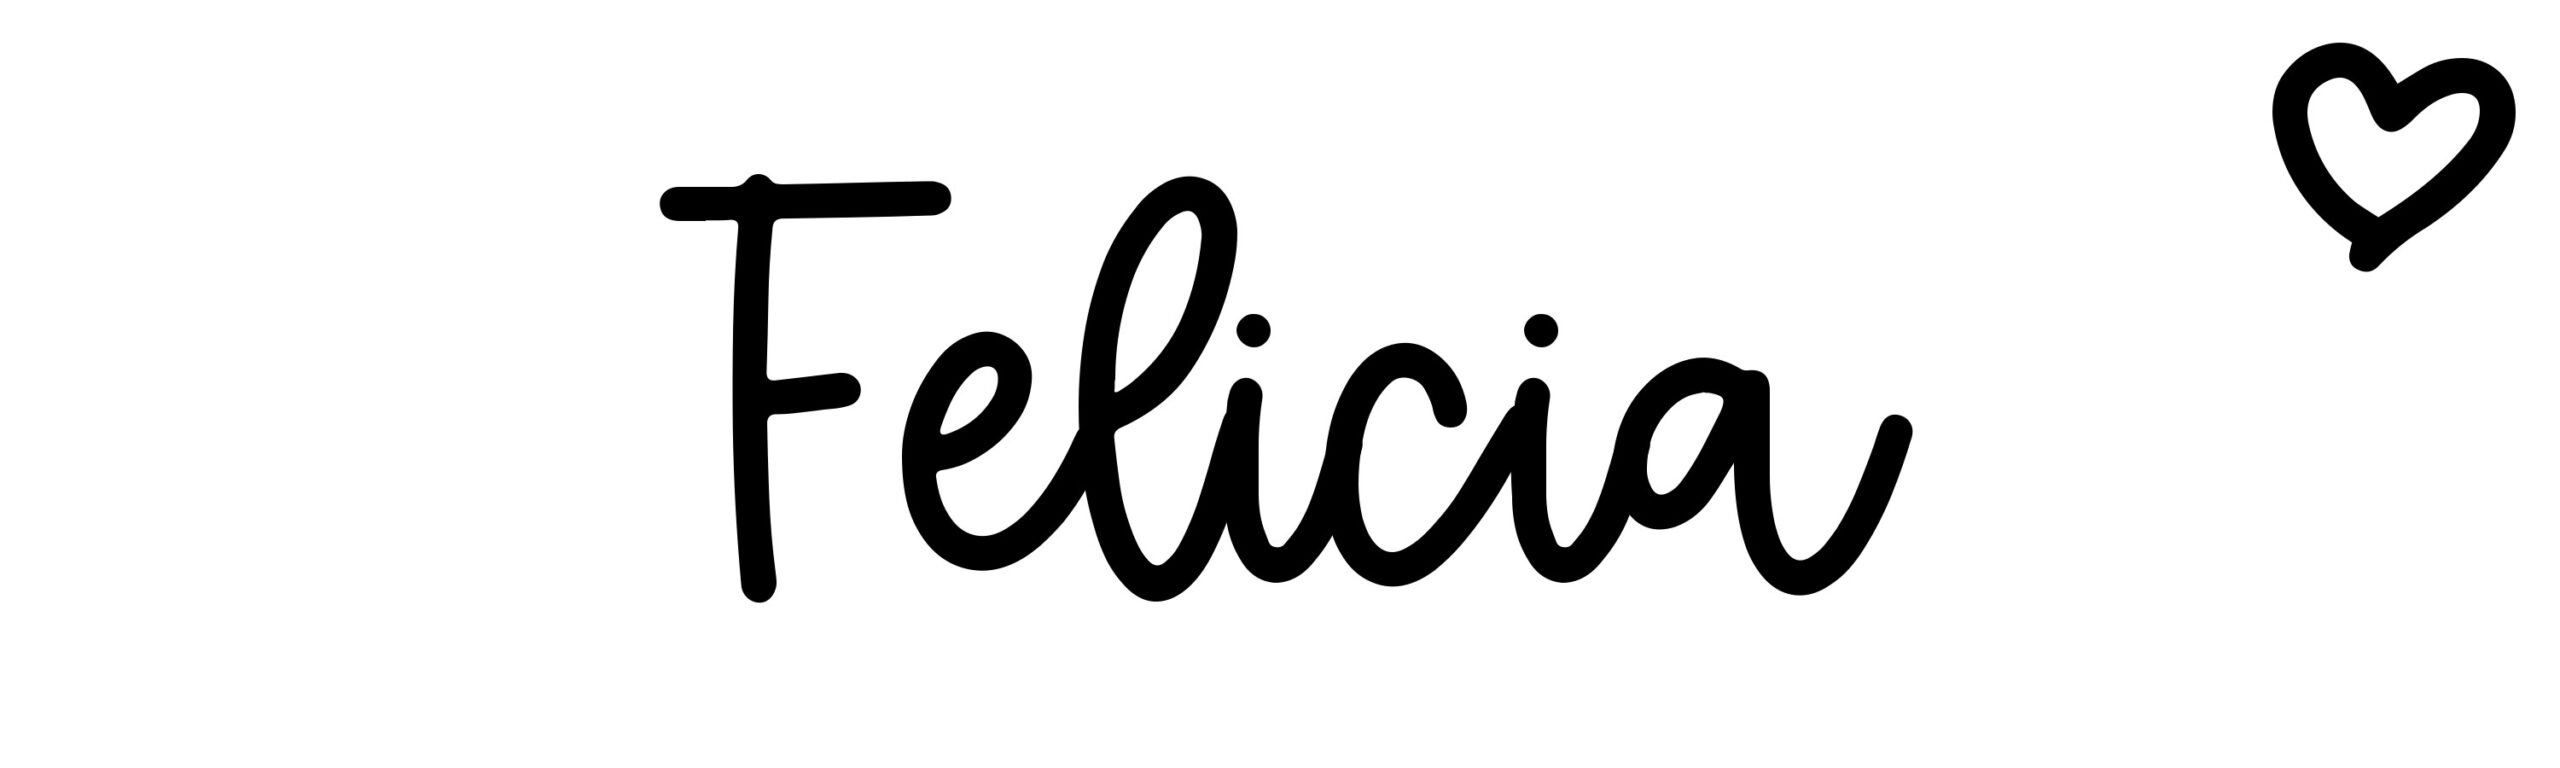 Felicia - Name meaning, origin, variations and more